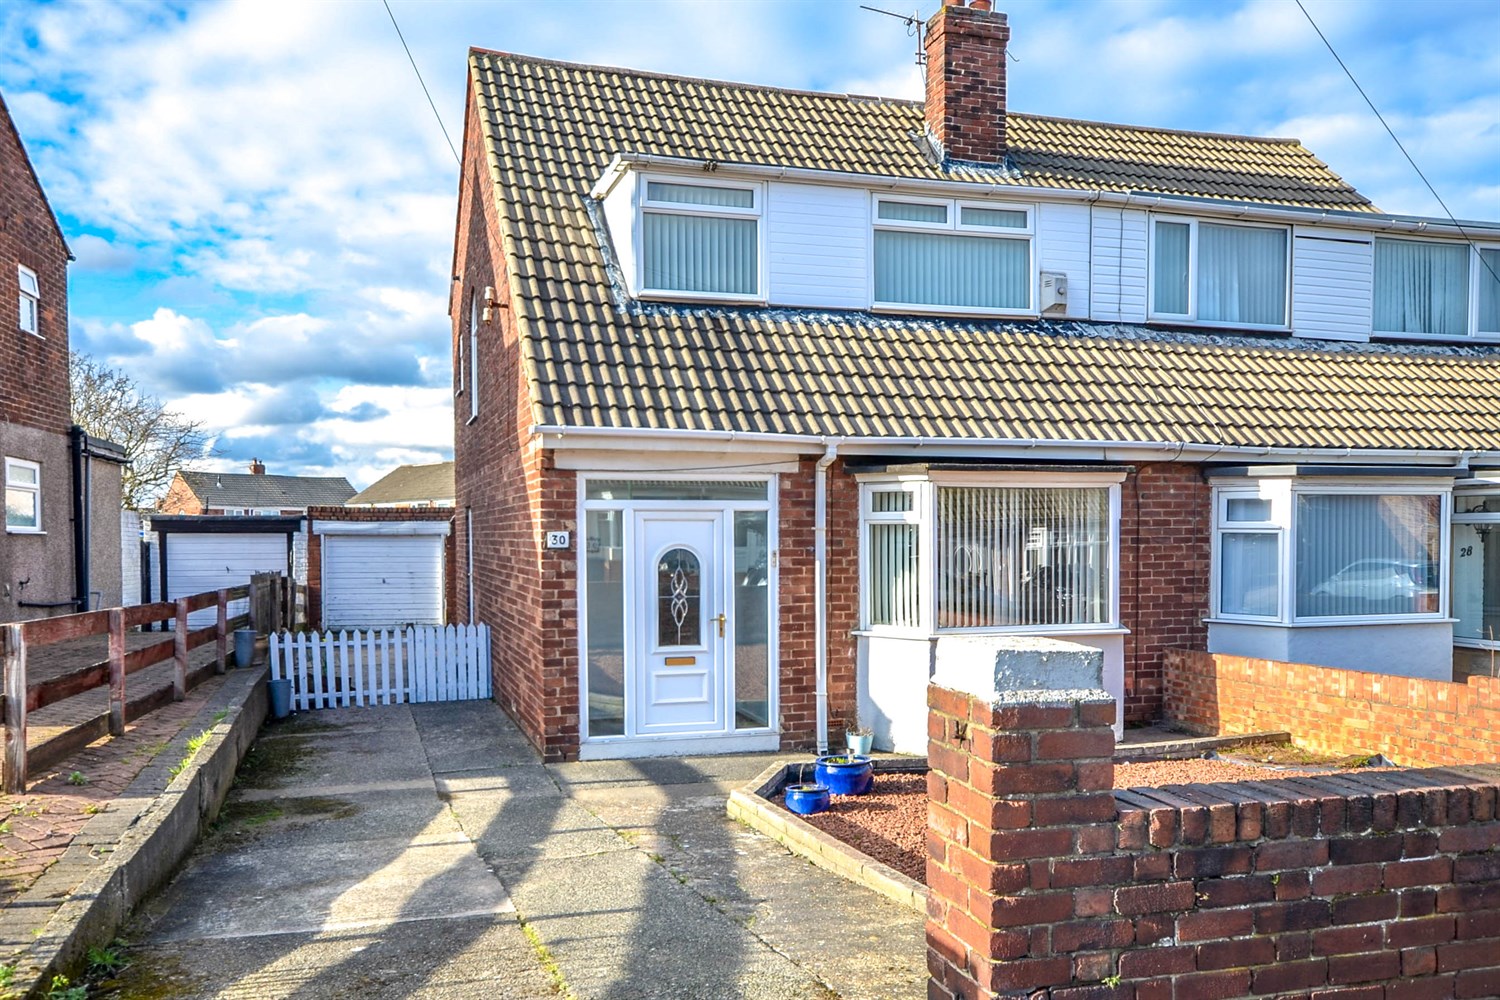 3 bed semi-detached house for sale in Allendale Drive, South Shields - Property Image 1